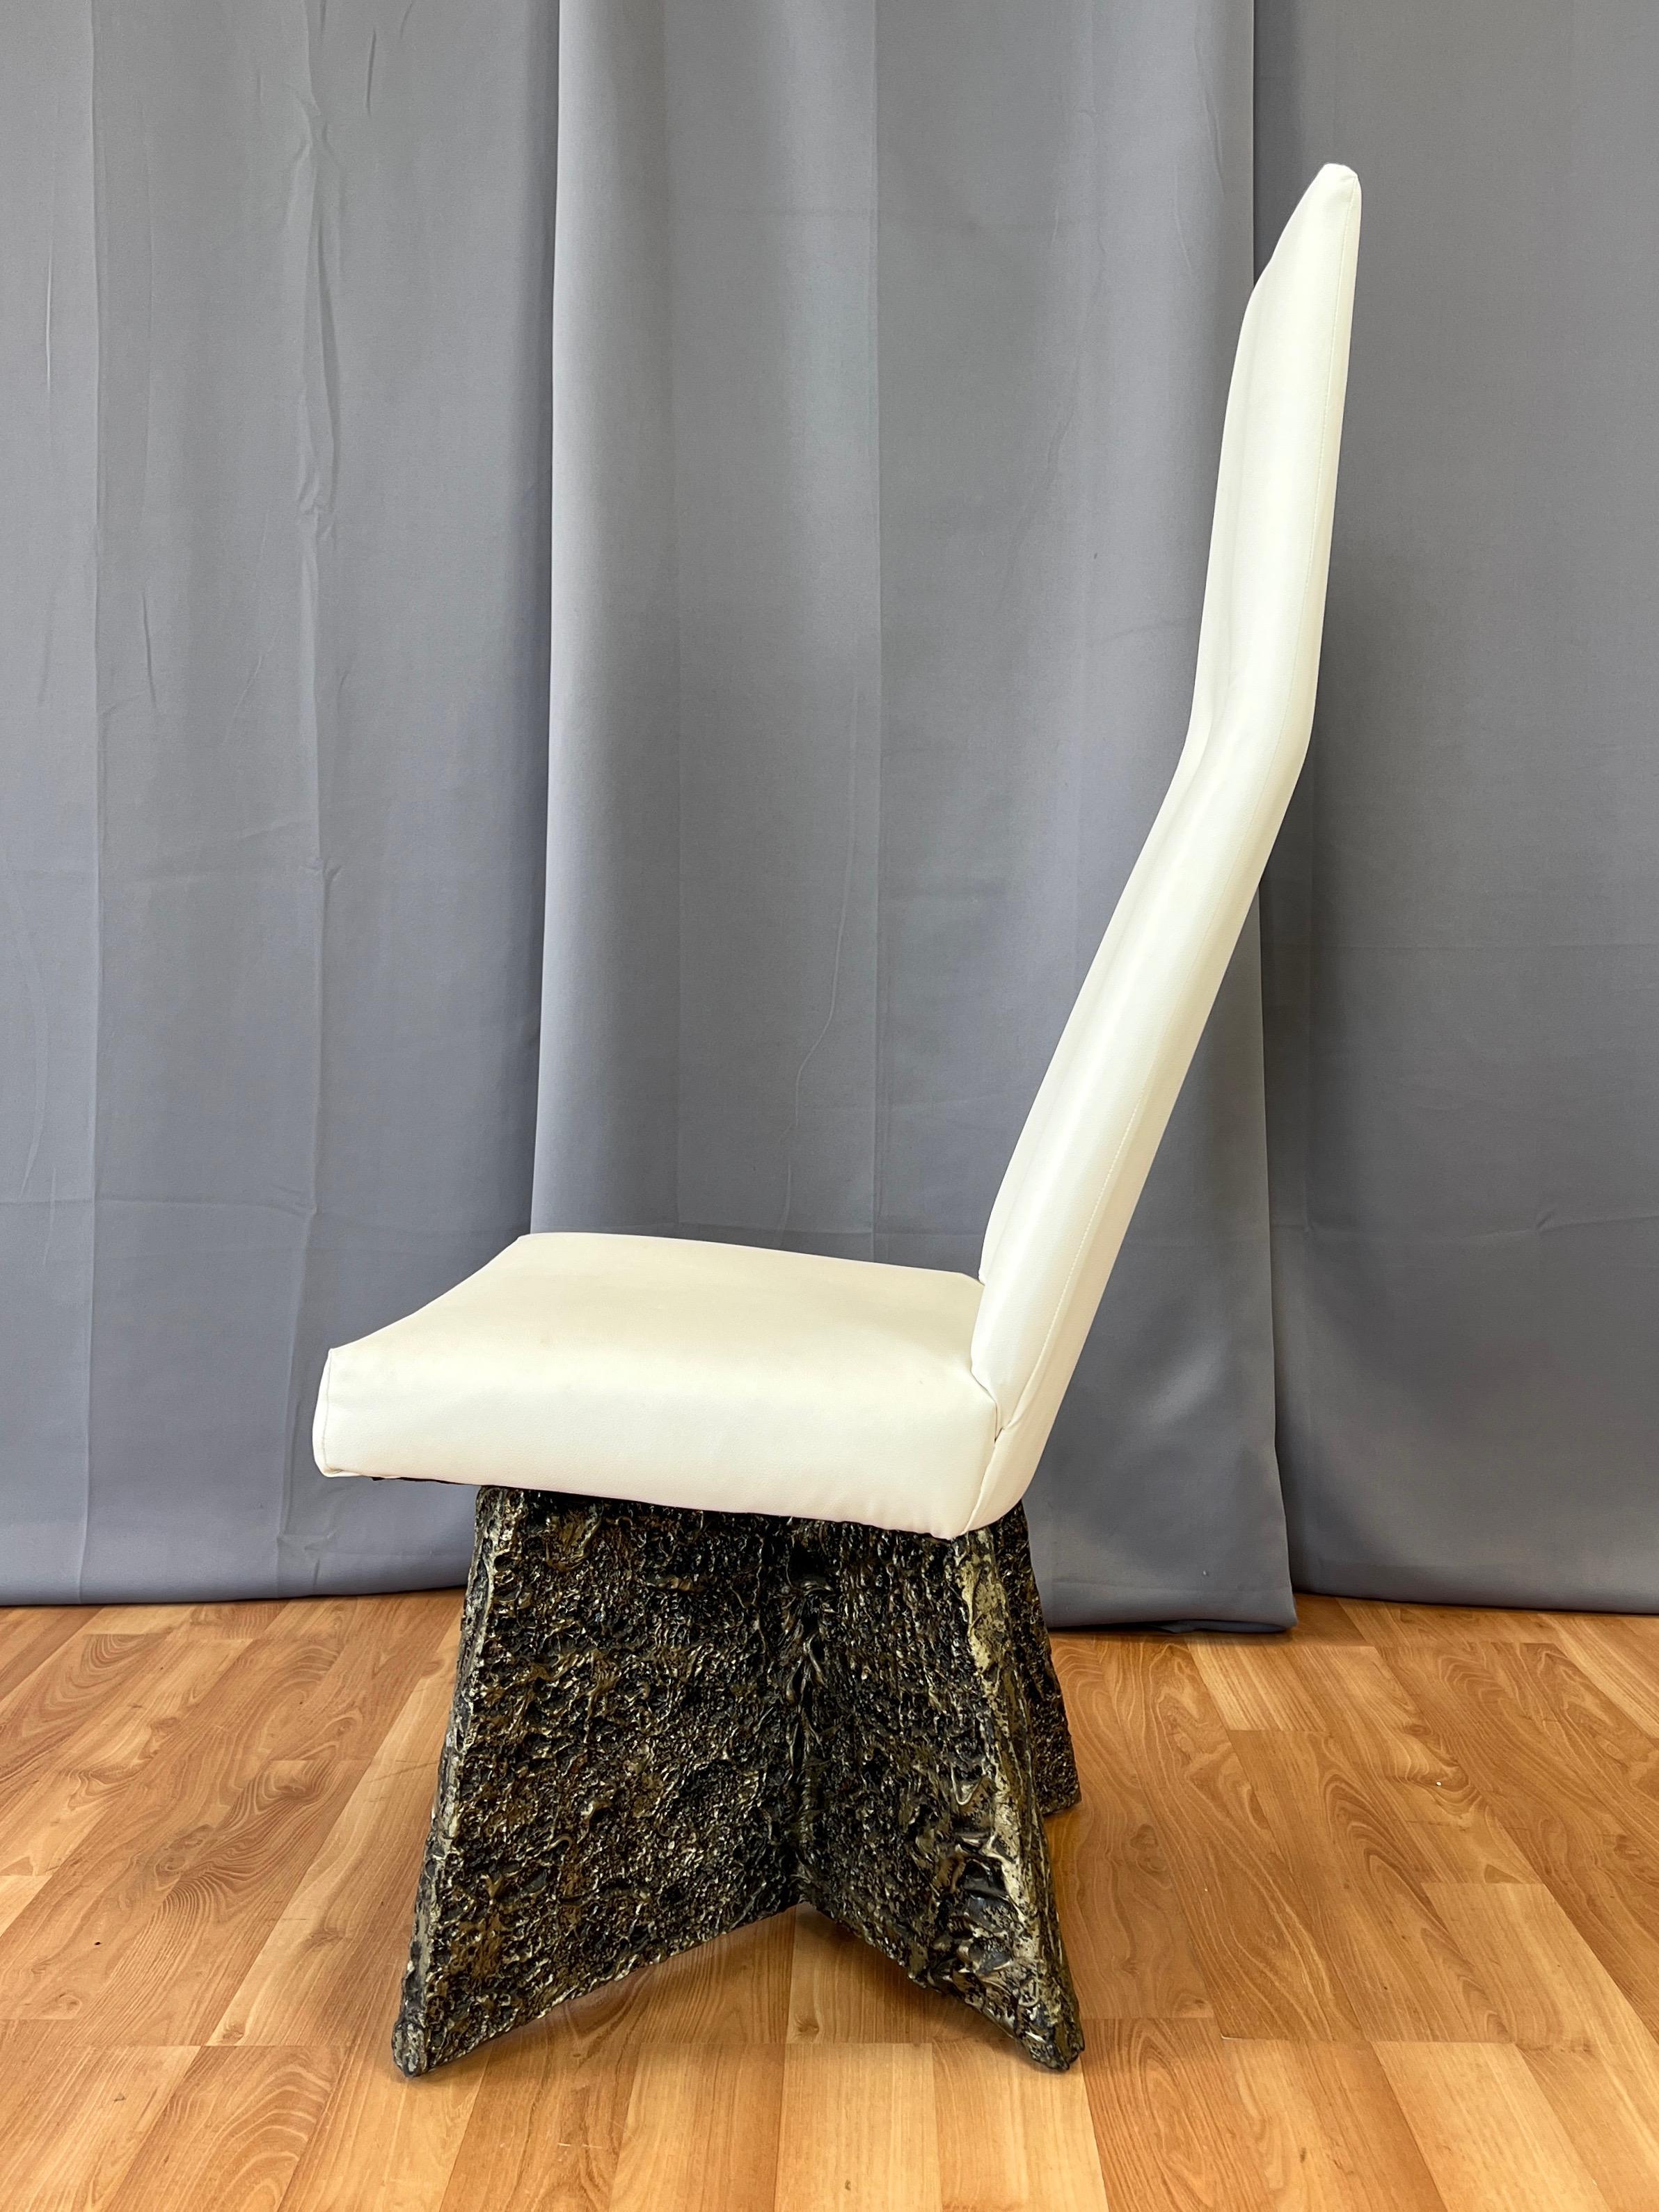 Adrian Pearsall for Craft Associates Brutalist High Back Side Chair, Late 1960s For Sale 2